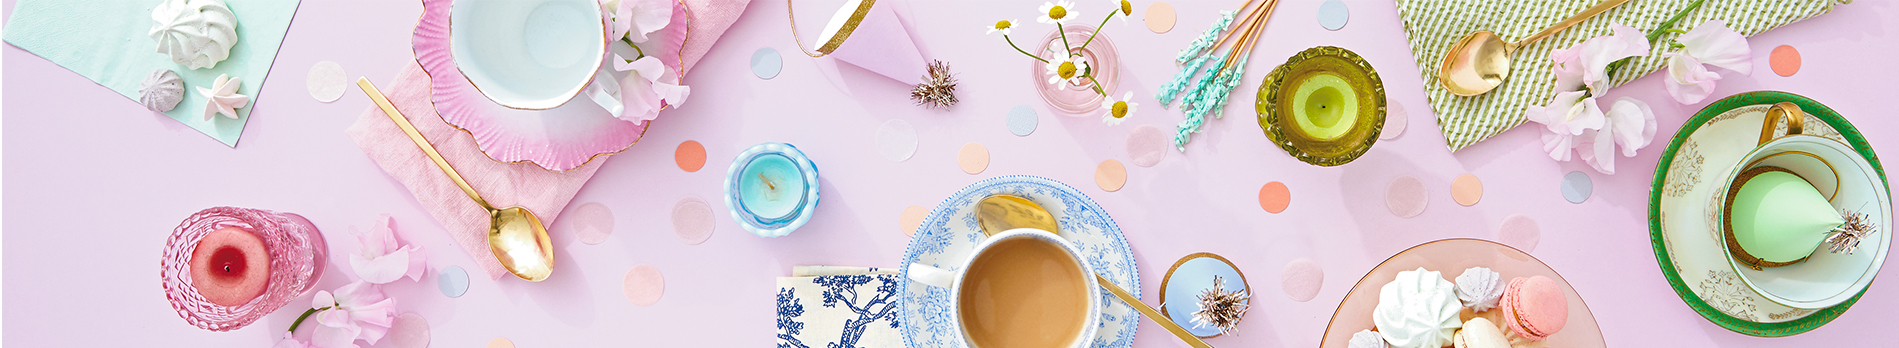 A tea party laid out on a pink tablecloth with colorful polka dot confetti strewn around.